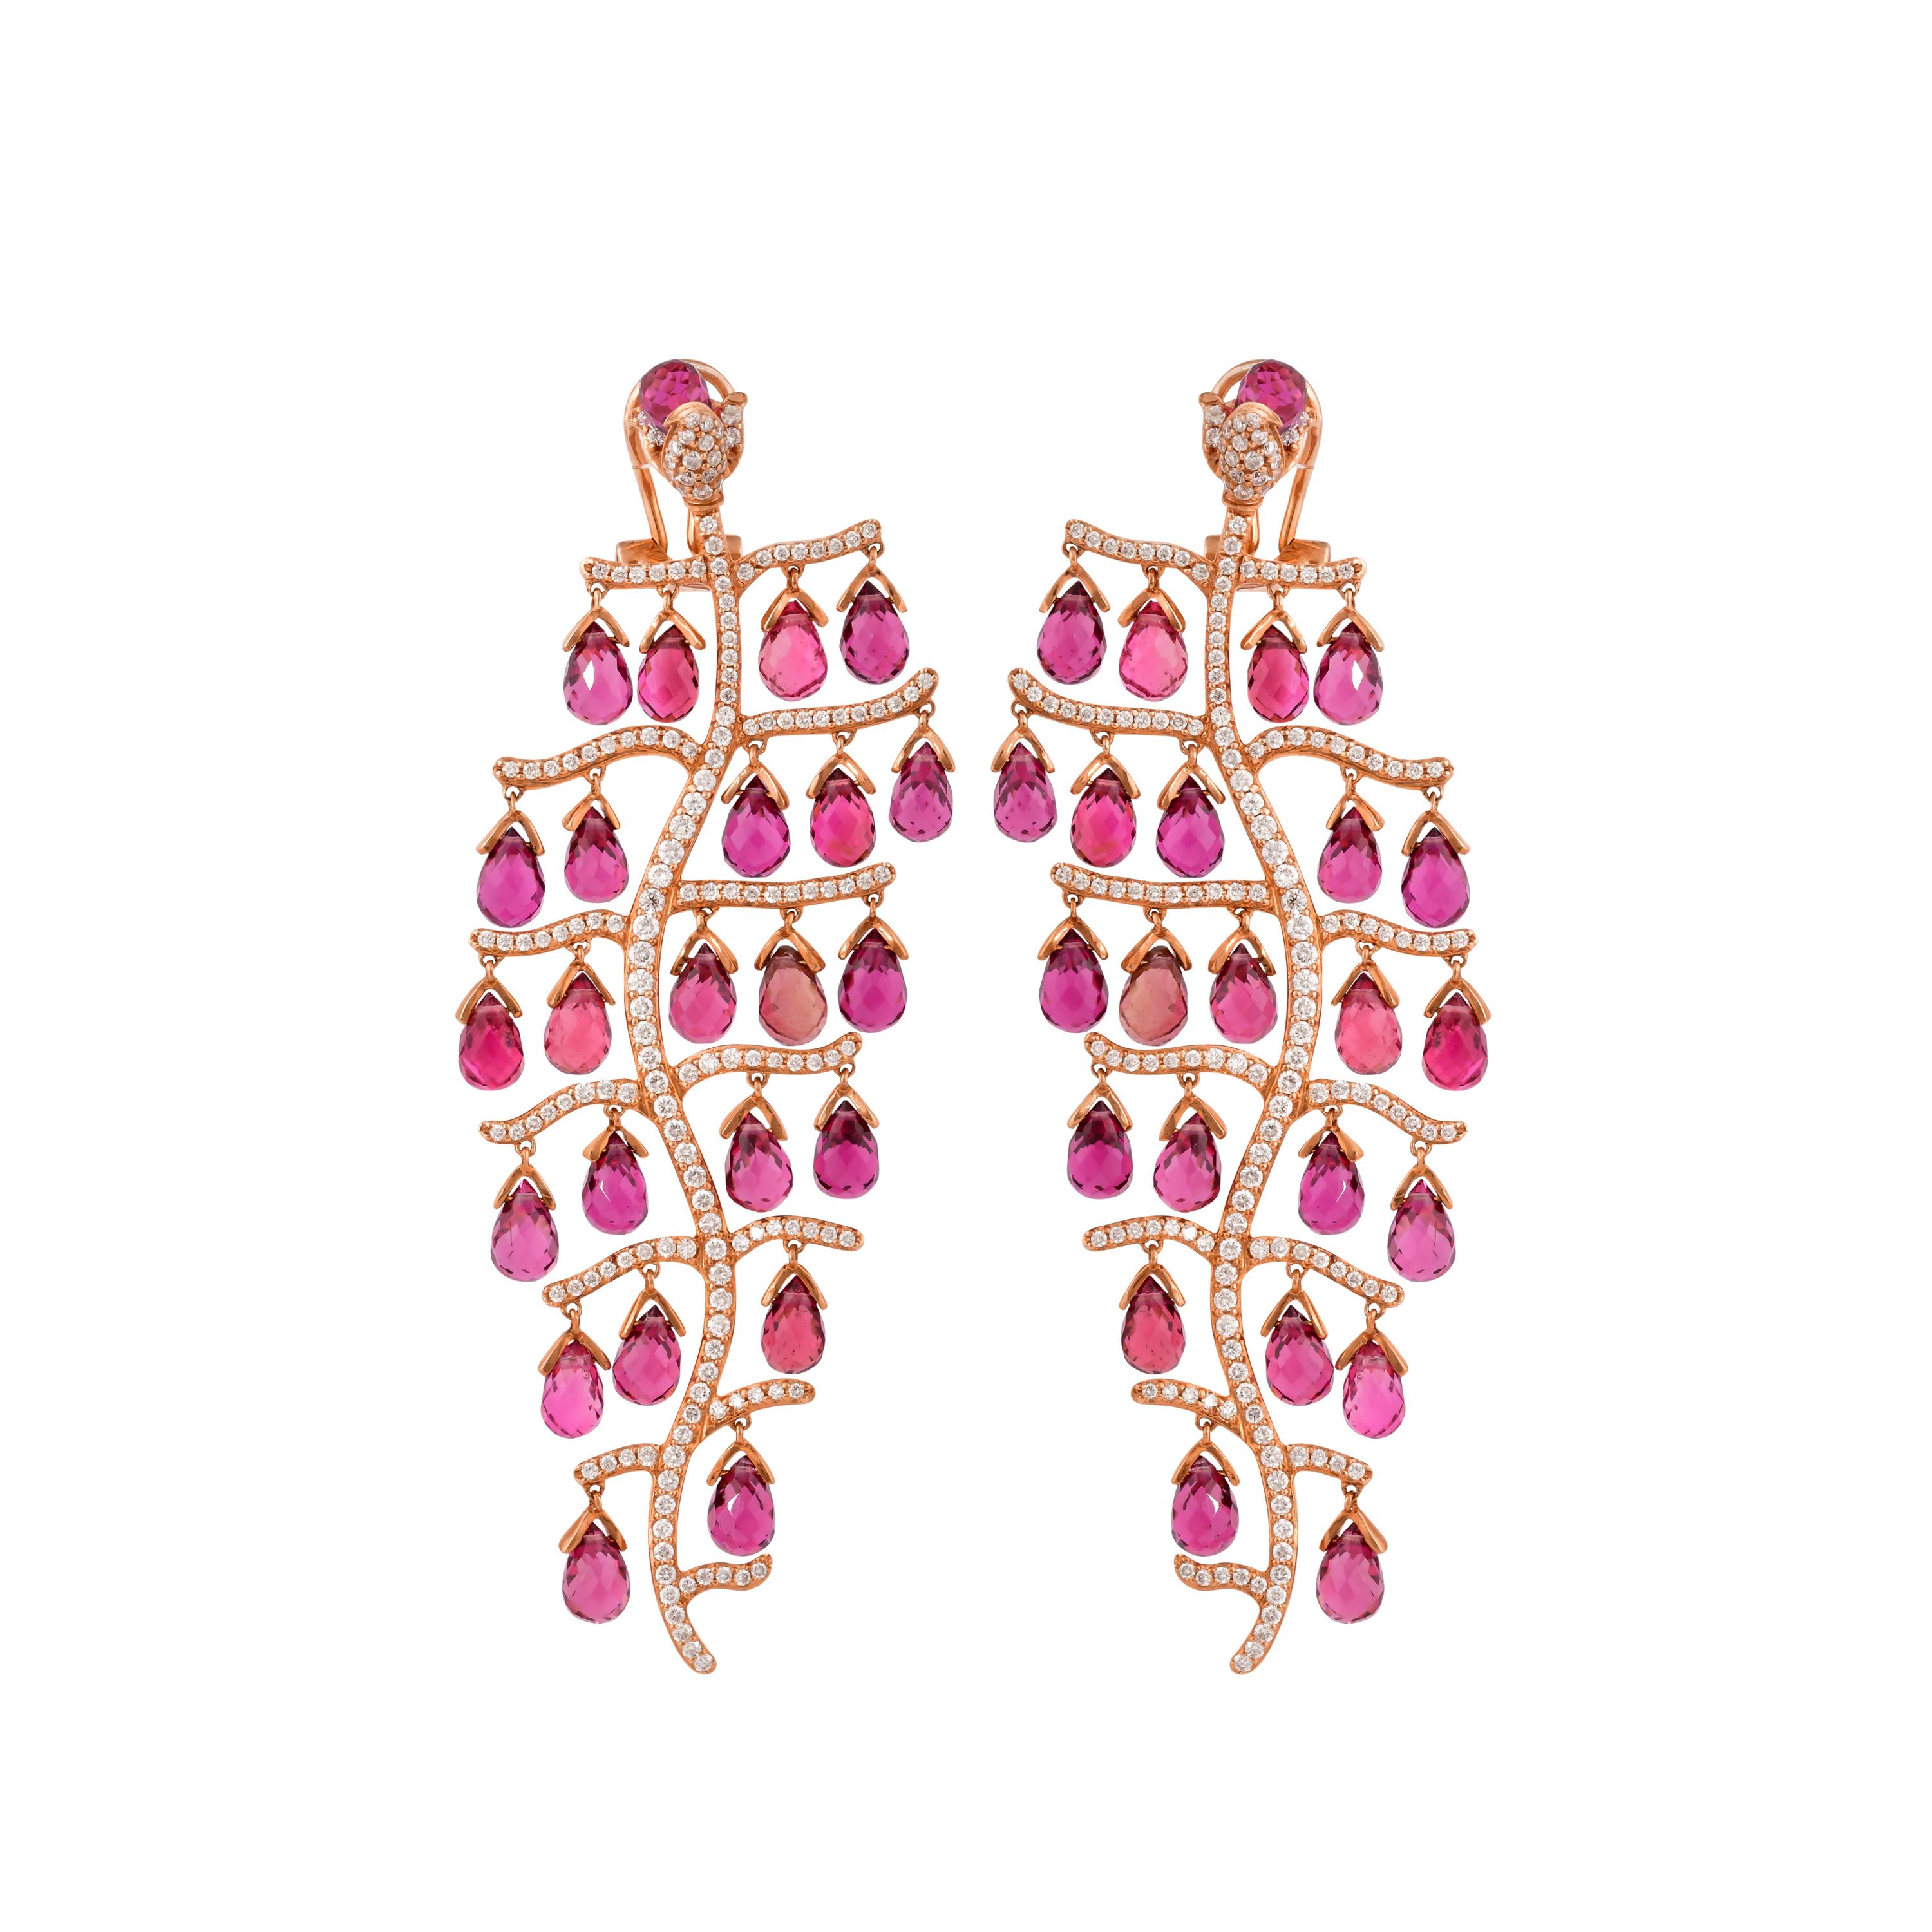 An exclusive collection of designer and unique dangle earrings by Sunita Nahata Fine Design. 

Pink Tourmaline Dangle Earring in 14 Karat Rose Gold.

Pink Tourmaline: 39.42 carat, 6X4 Size, Drop Shape.
White Diamond: 0.75 carat, 1.00 Size, Round